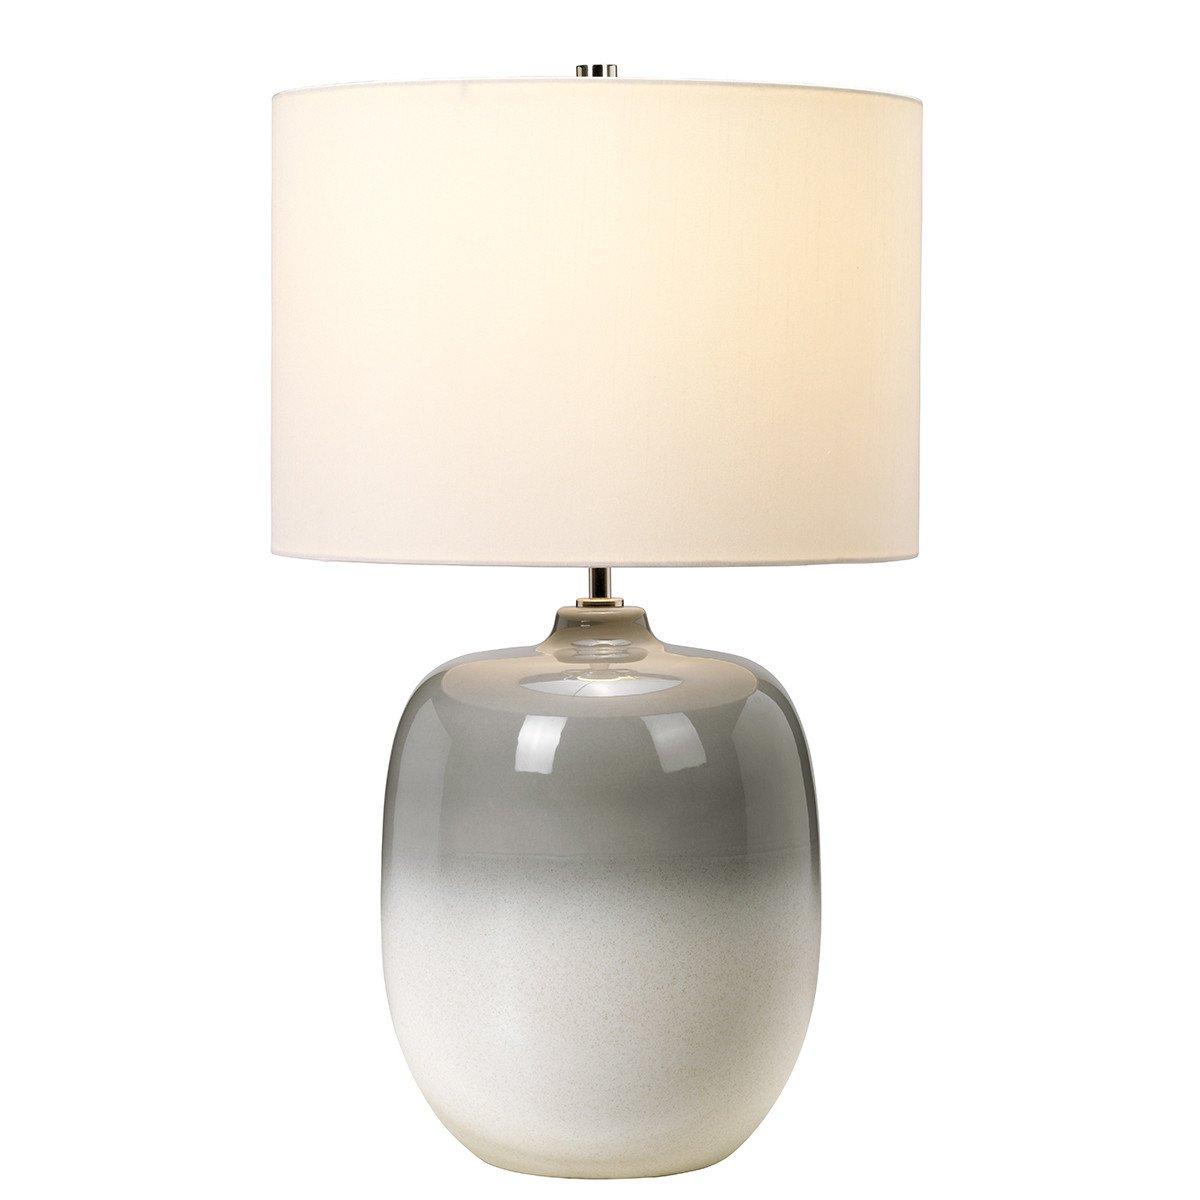 Chalk Farm Ceramic Table Lamp with Drum Shade